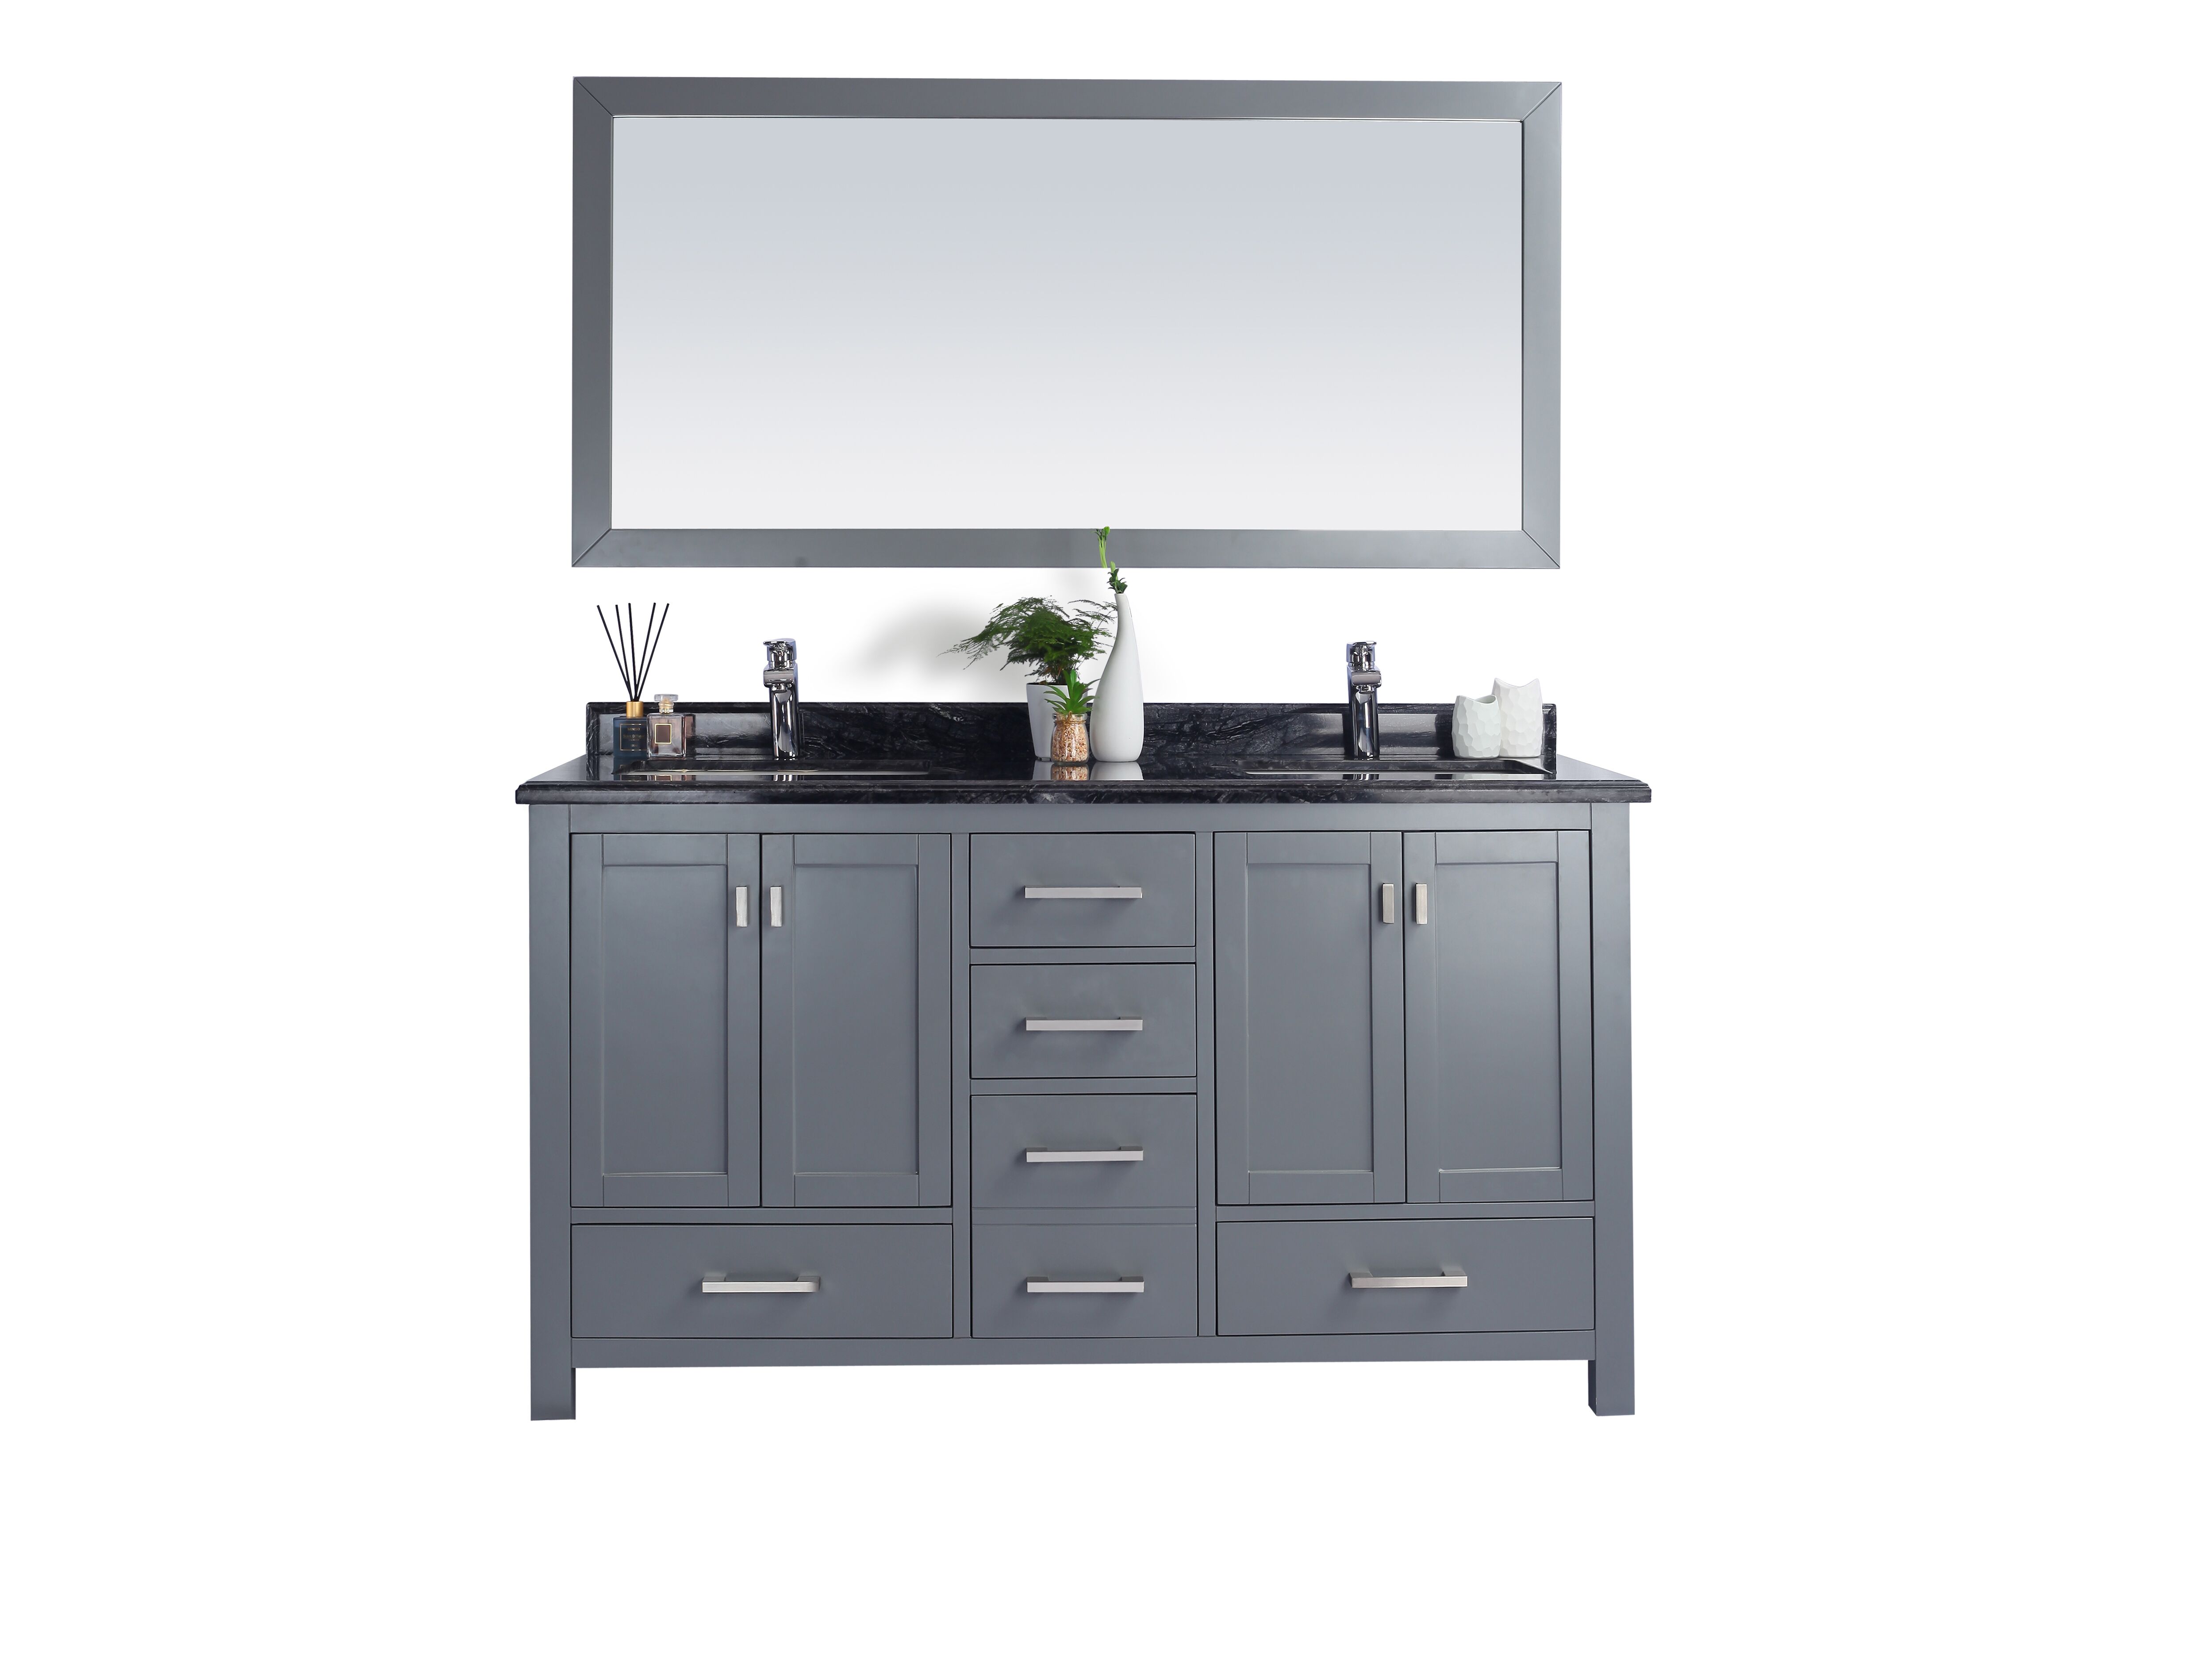 60" Double Sink Bathroom Vanity Cabinet + Top and Color Options